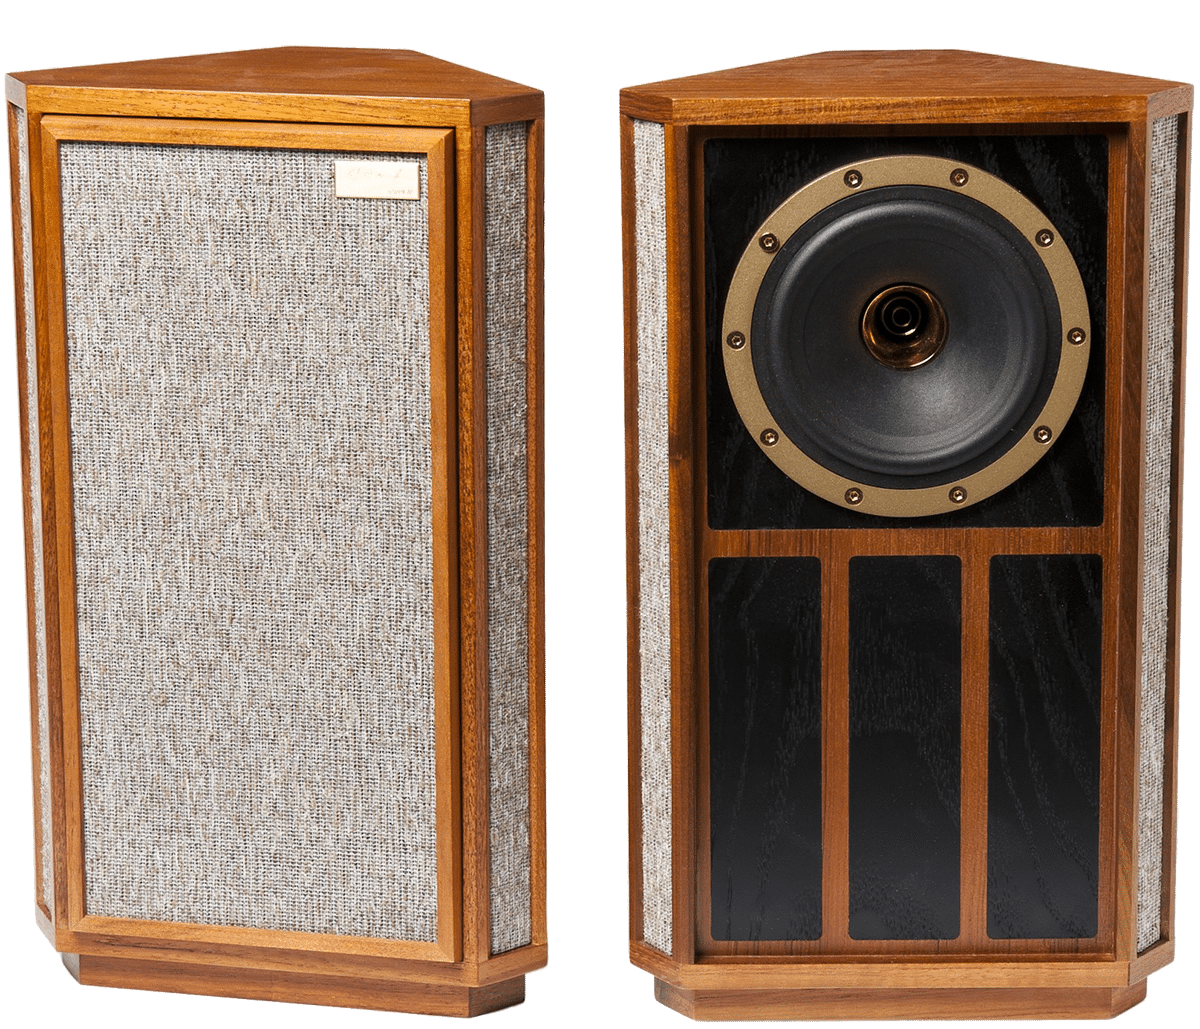 Tannoy gold. Tannoy Autograph Mini. Tannoy Gold 8. Tannoy Gold 5. Tannoy Gold 7.